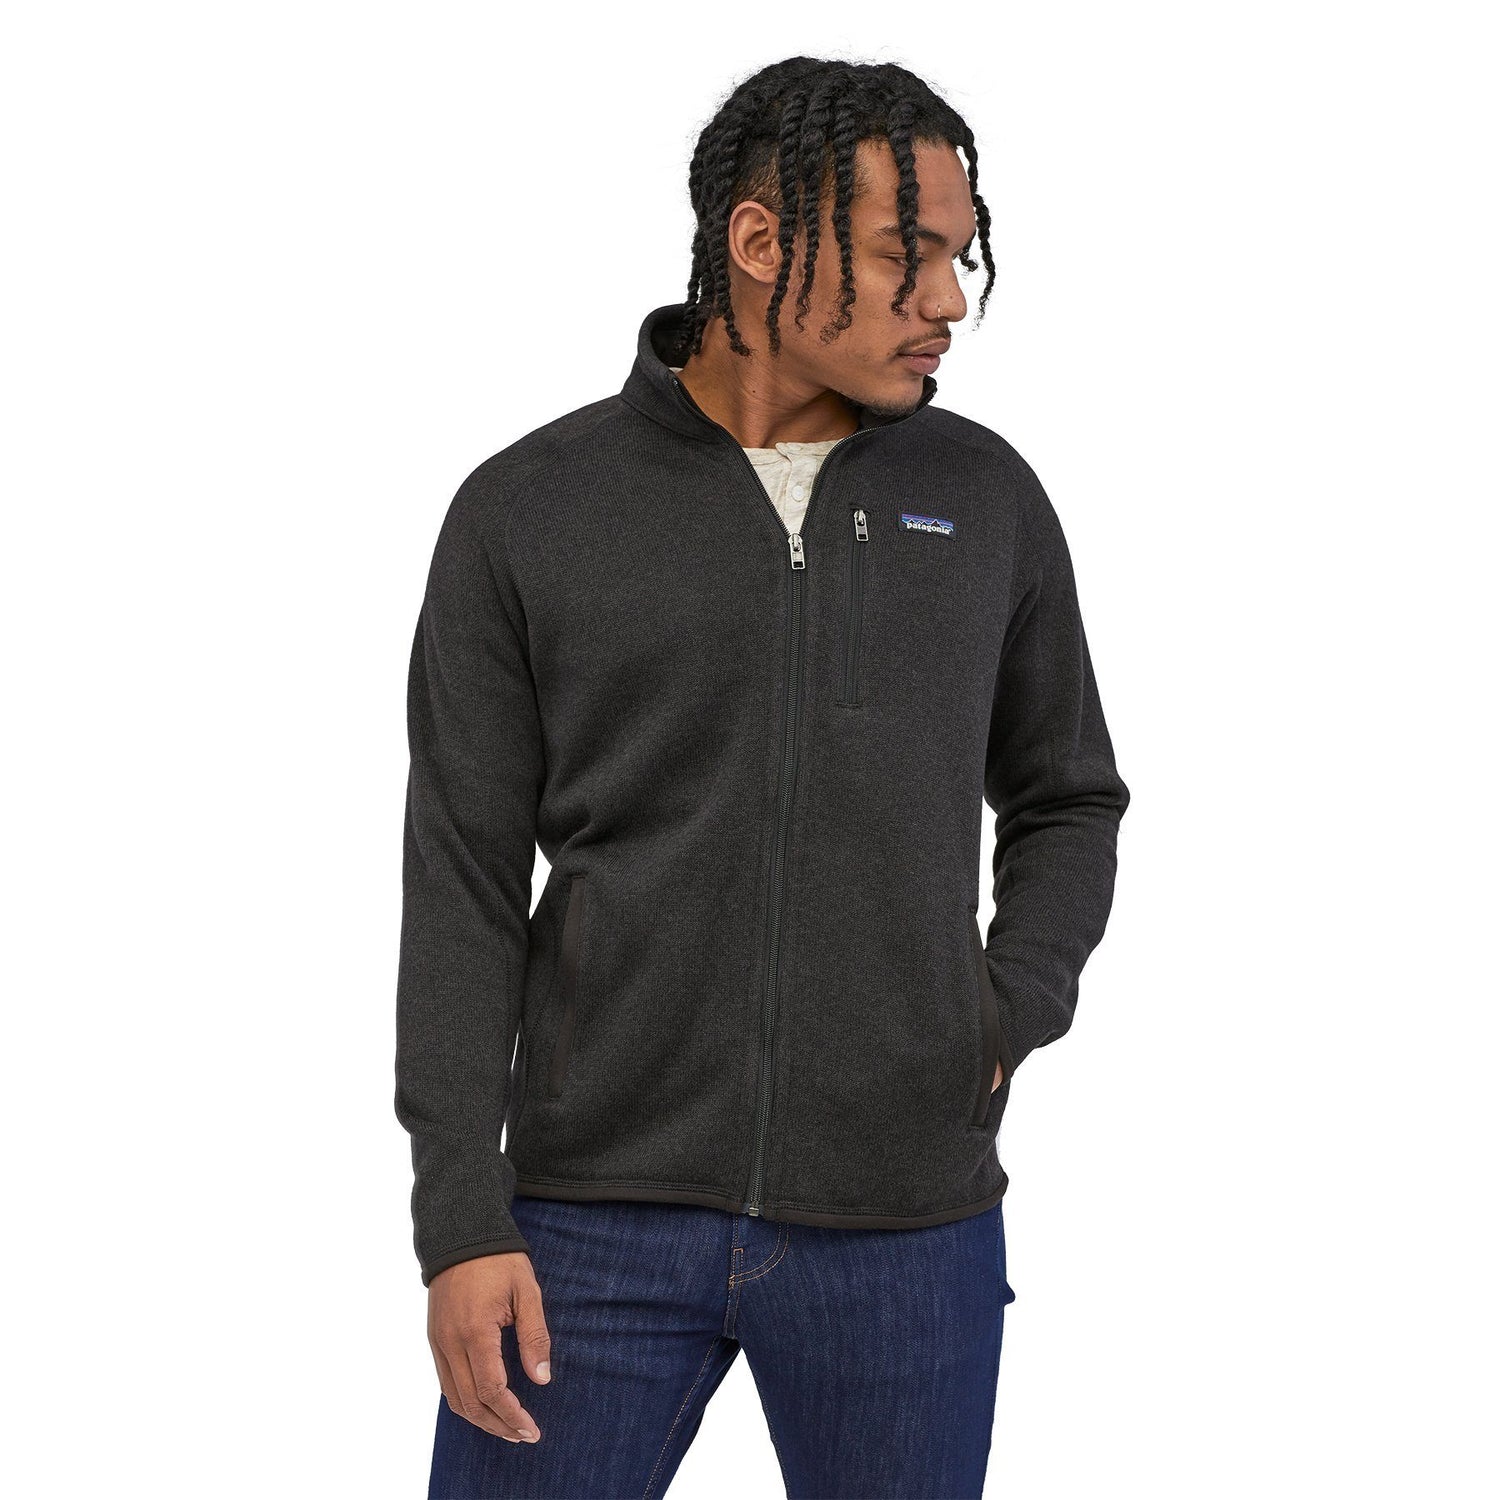 Patagonia - M's Better Sweater Fleece Jacket  - 100 % recycled polyester - Weekendbee - sustainable sportswear